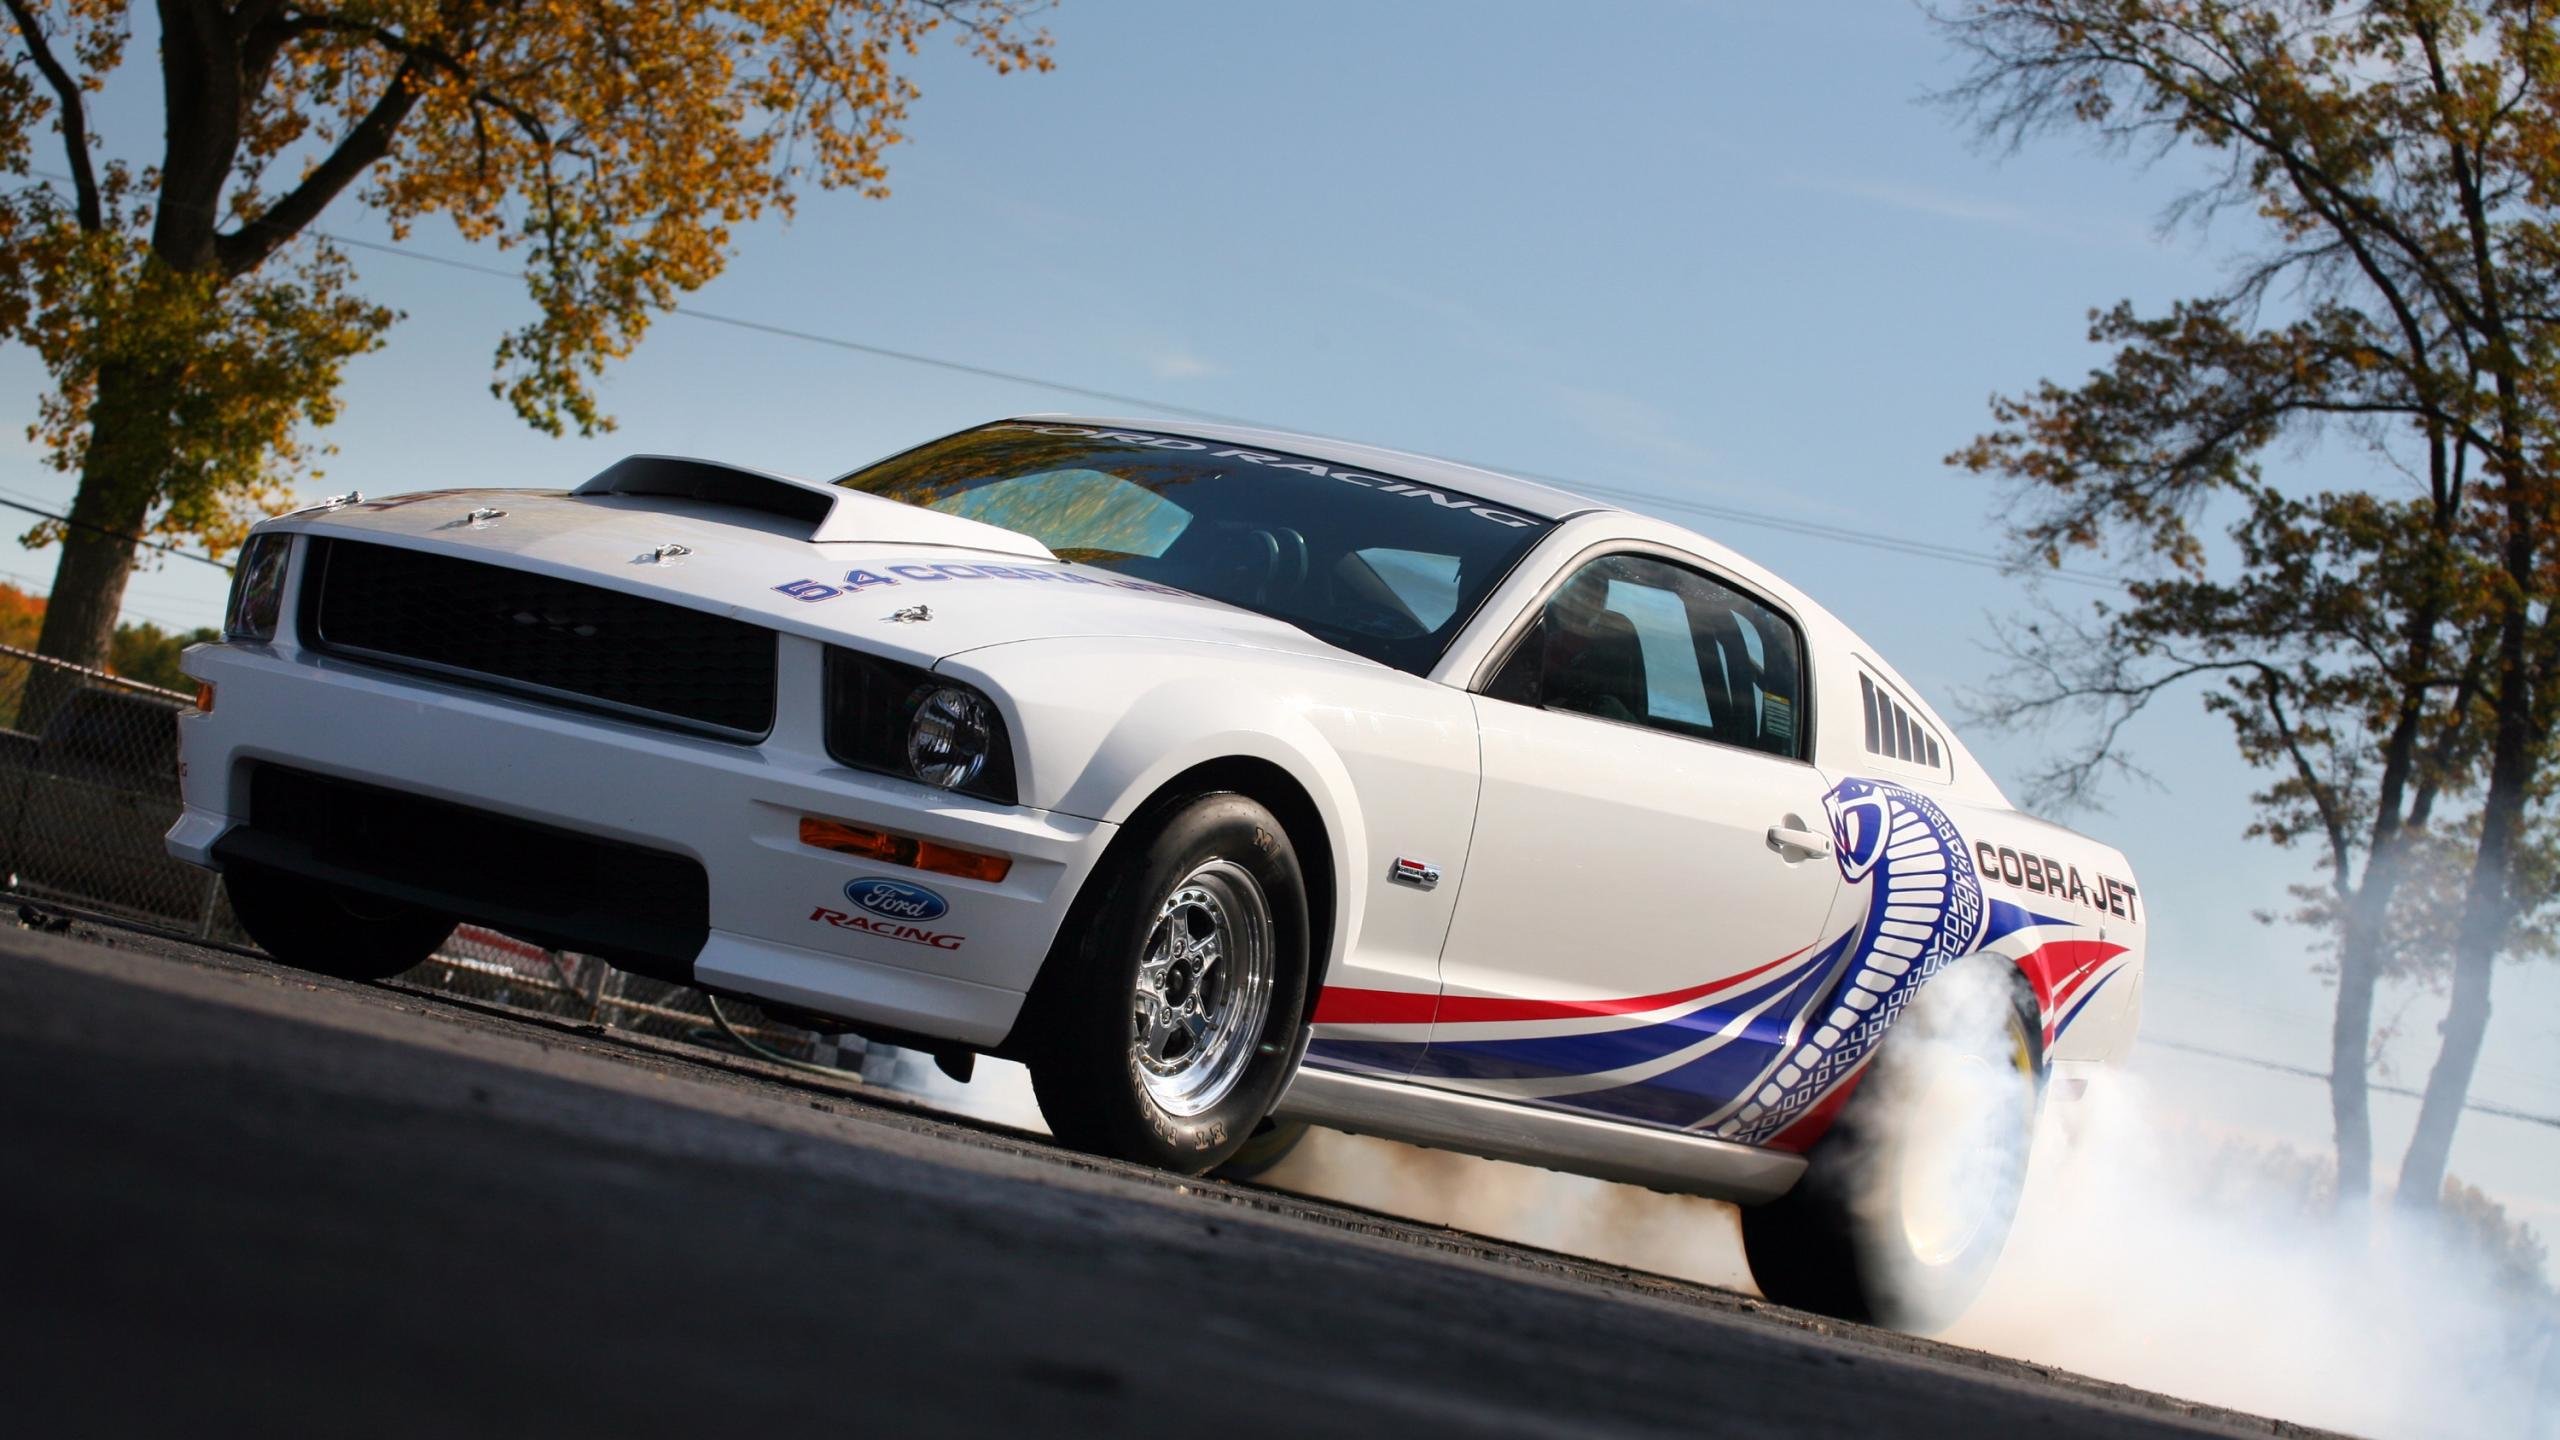 Awesome Ford Mustang Cobra Jet Twin-turbo free wallpaper ID:239806 for hd 2560x1440 computer